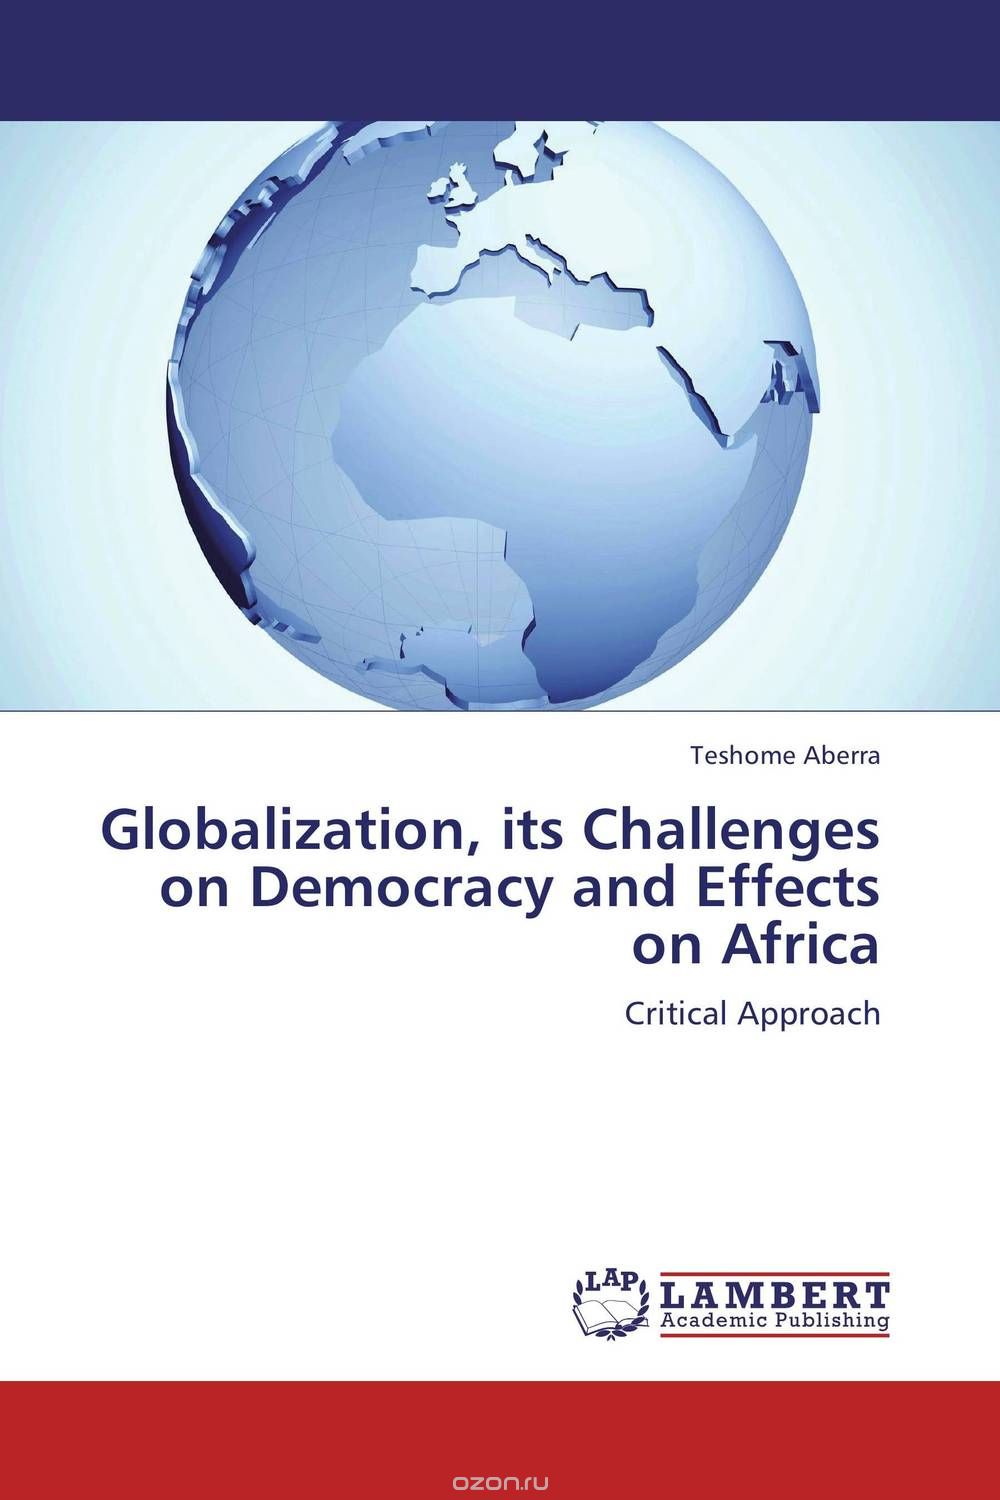 Globalization, its Challenges on Democracy and Effects on Africa